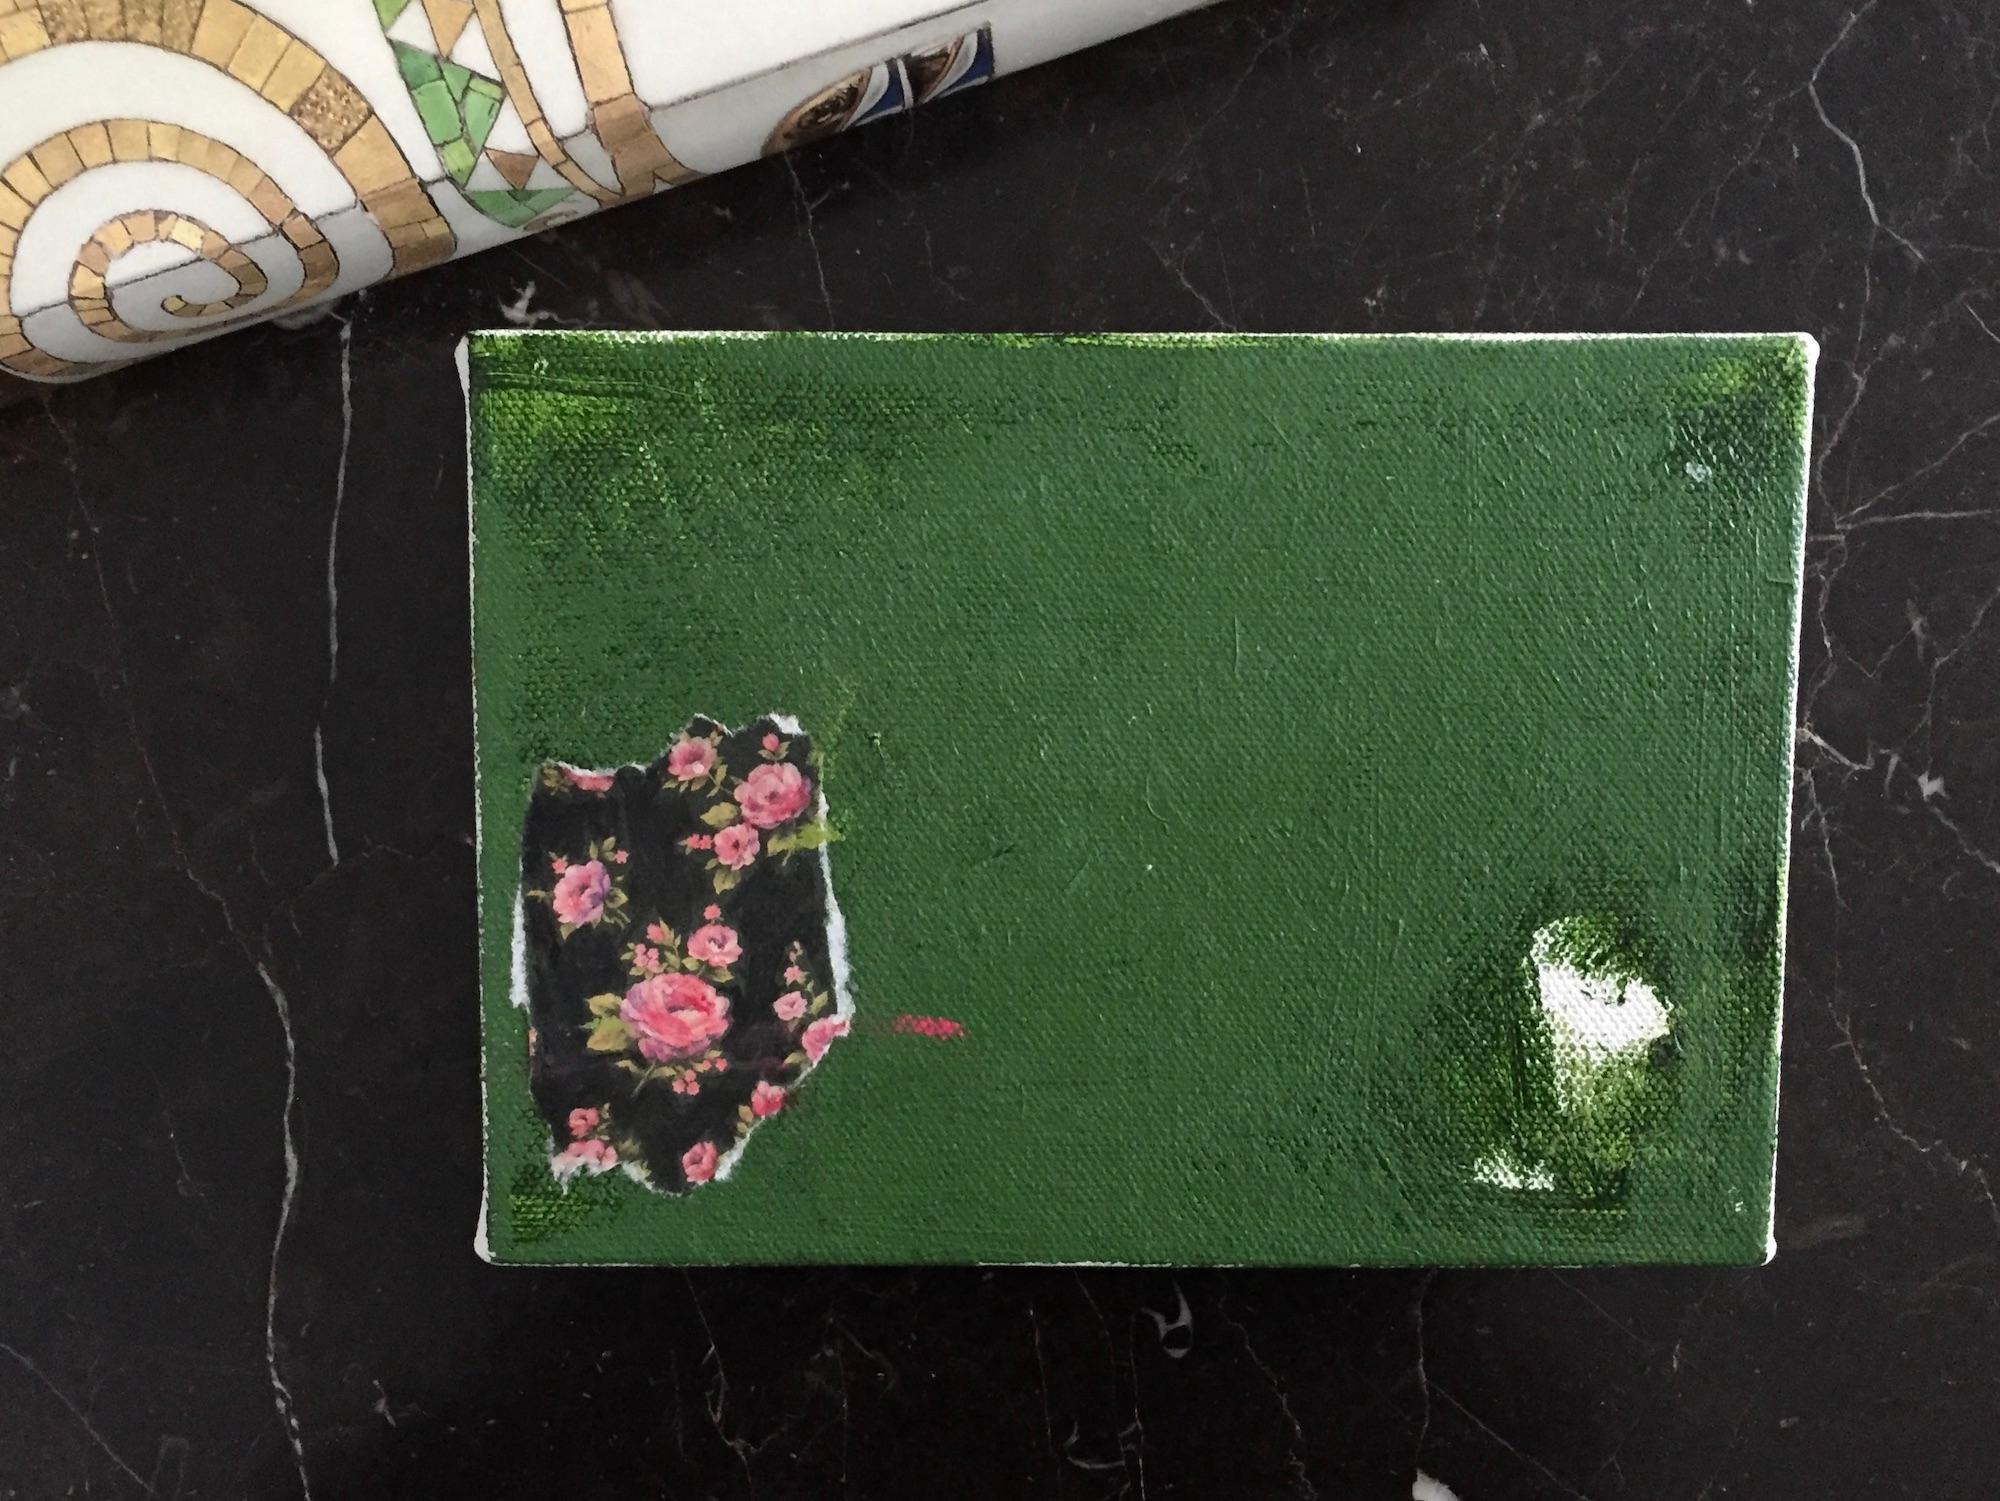 In this delicate small work, the combination of paint, pastel and collage build up an impressionistic scene with the focus remaining on strong composition. Pink and black against a vibrant green background along with a pop of contrasting white